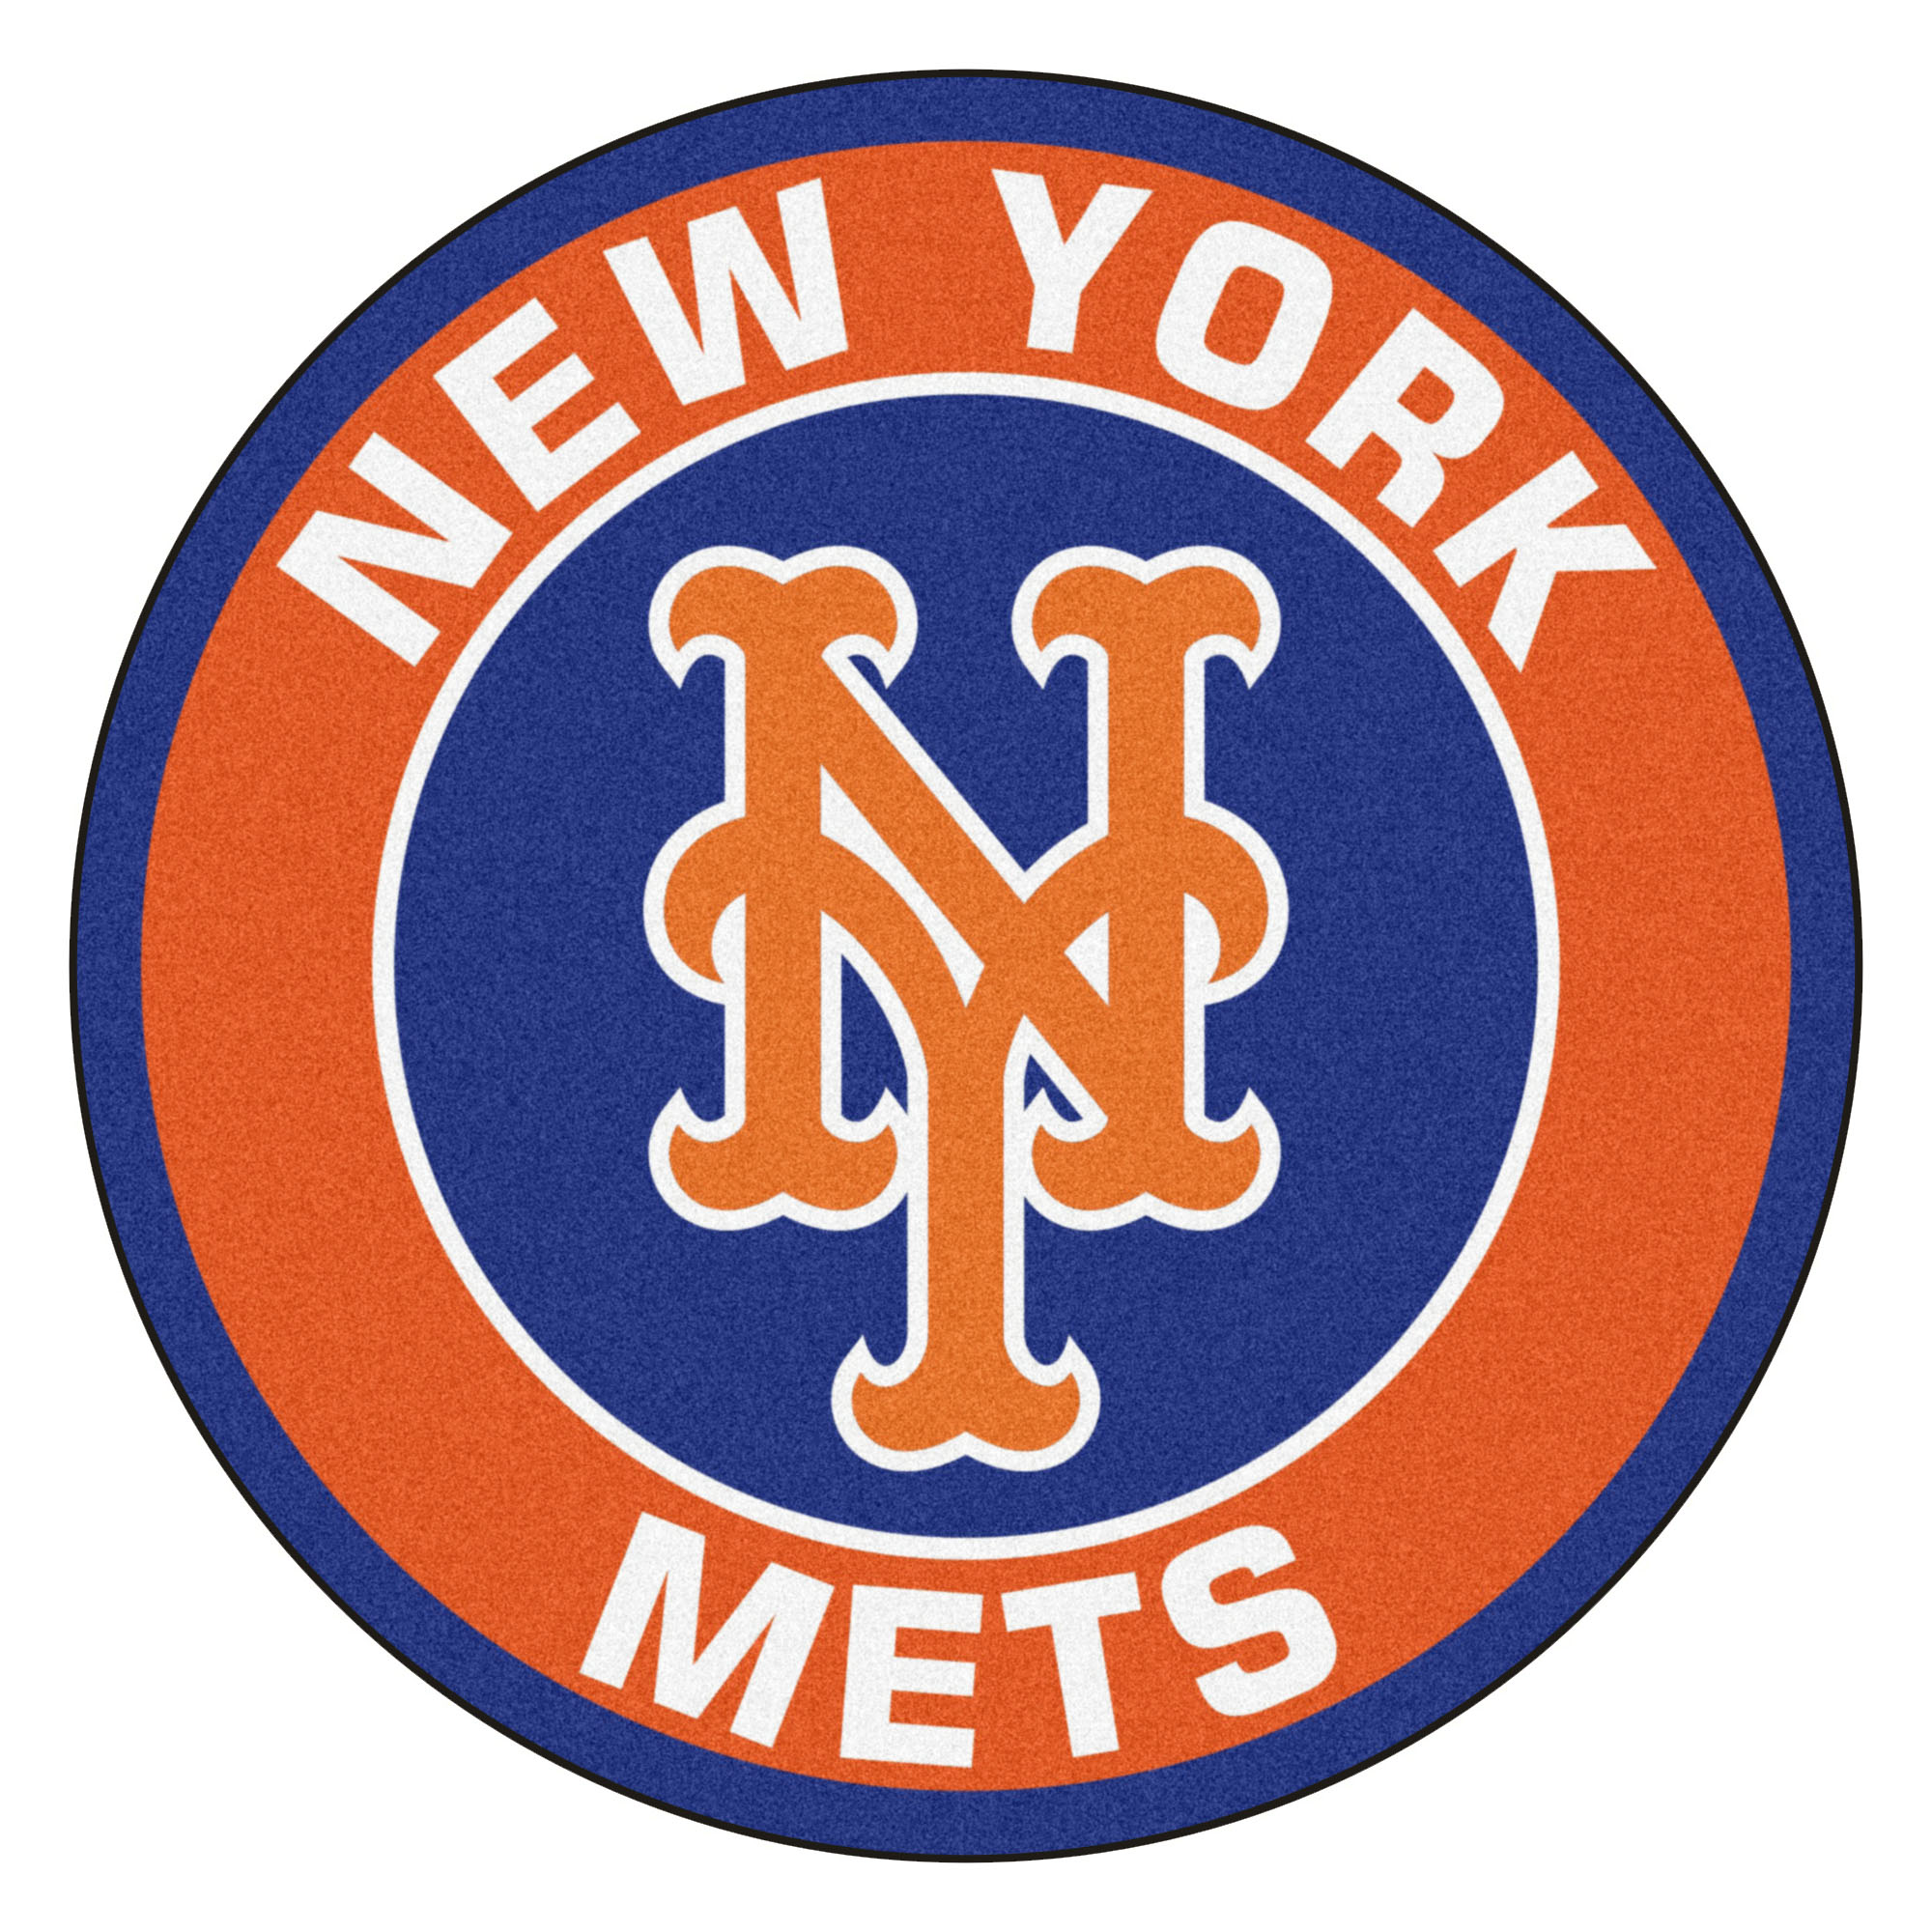 Presale Codes to purchase tickets for New York Mets 2016 Postseason games